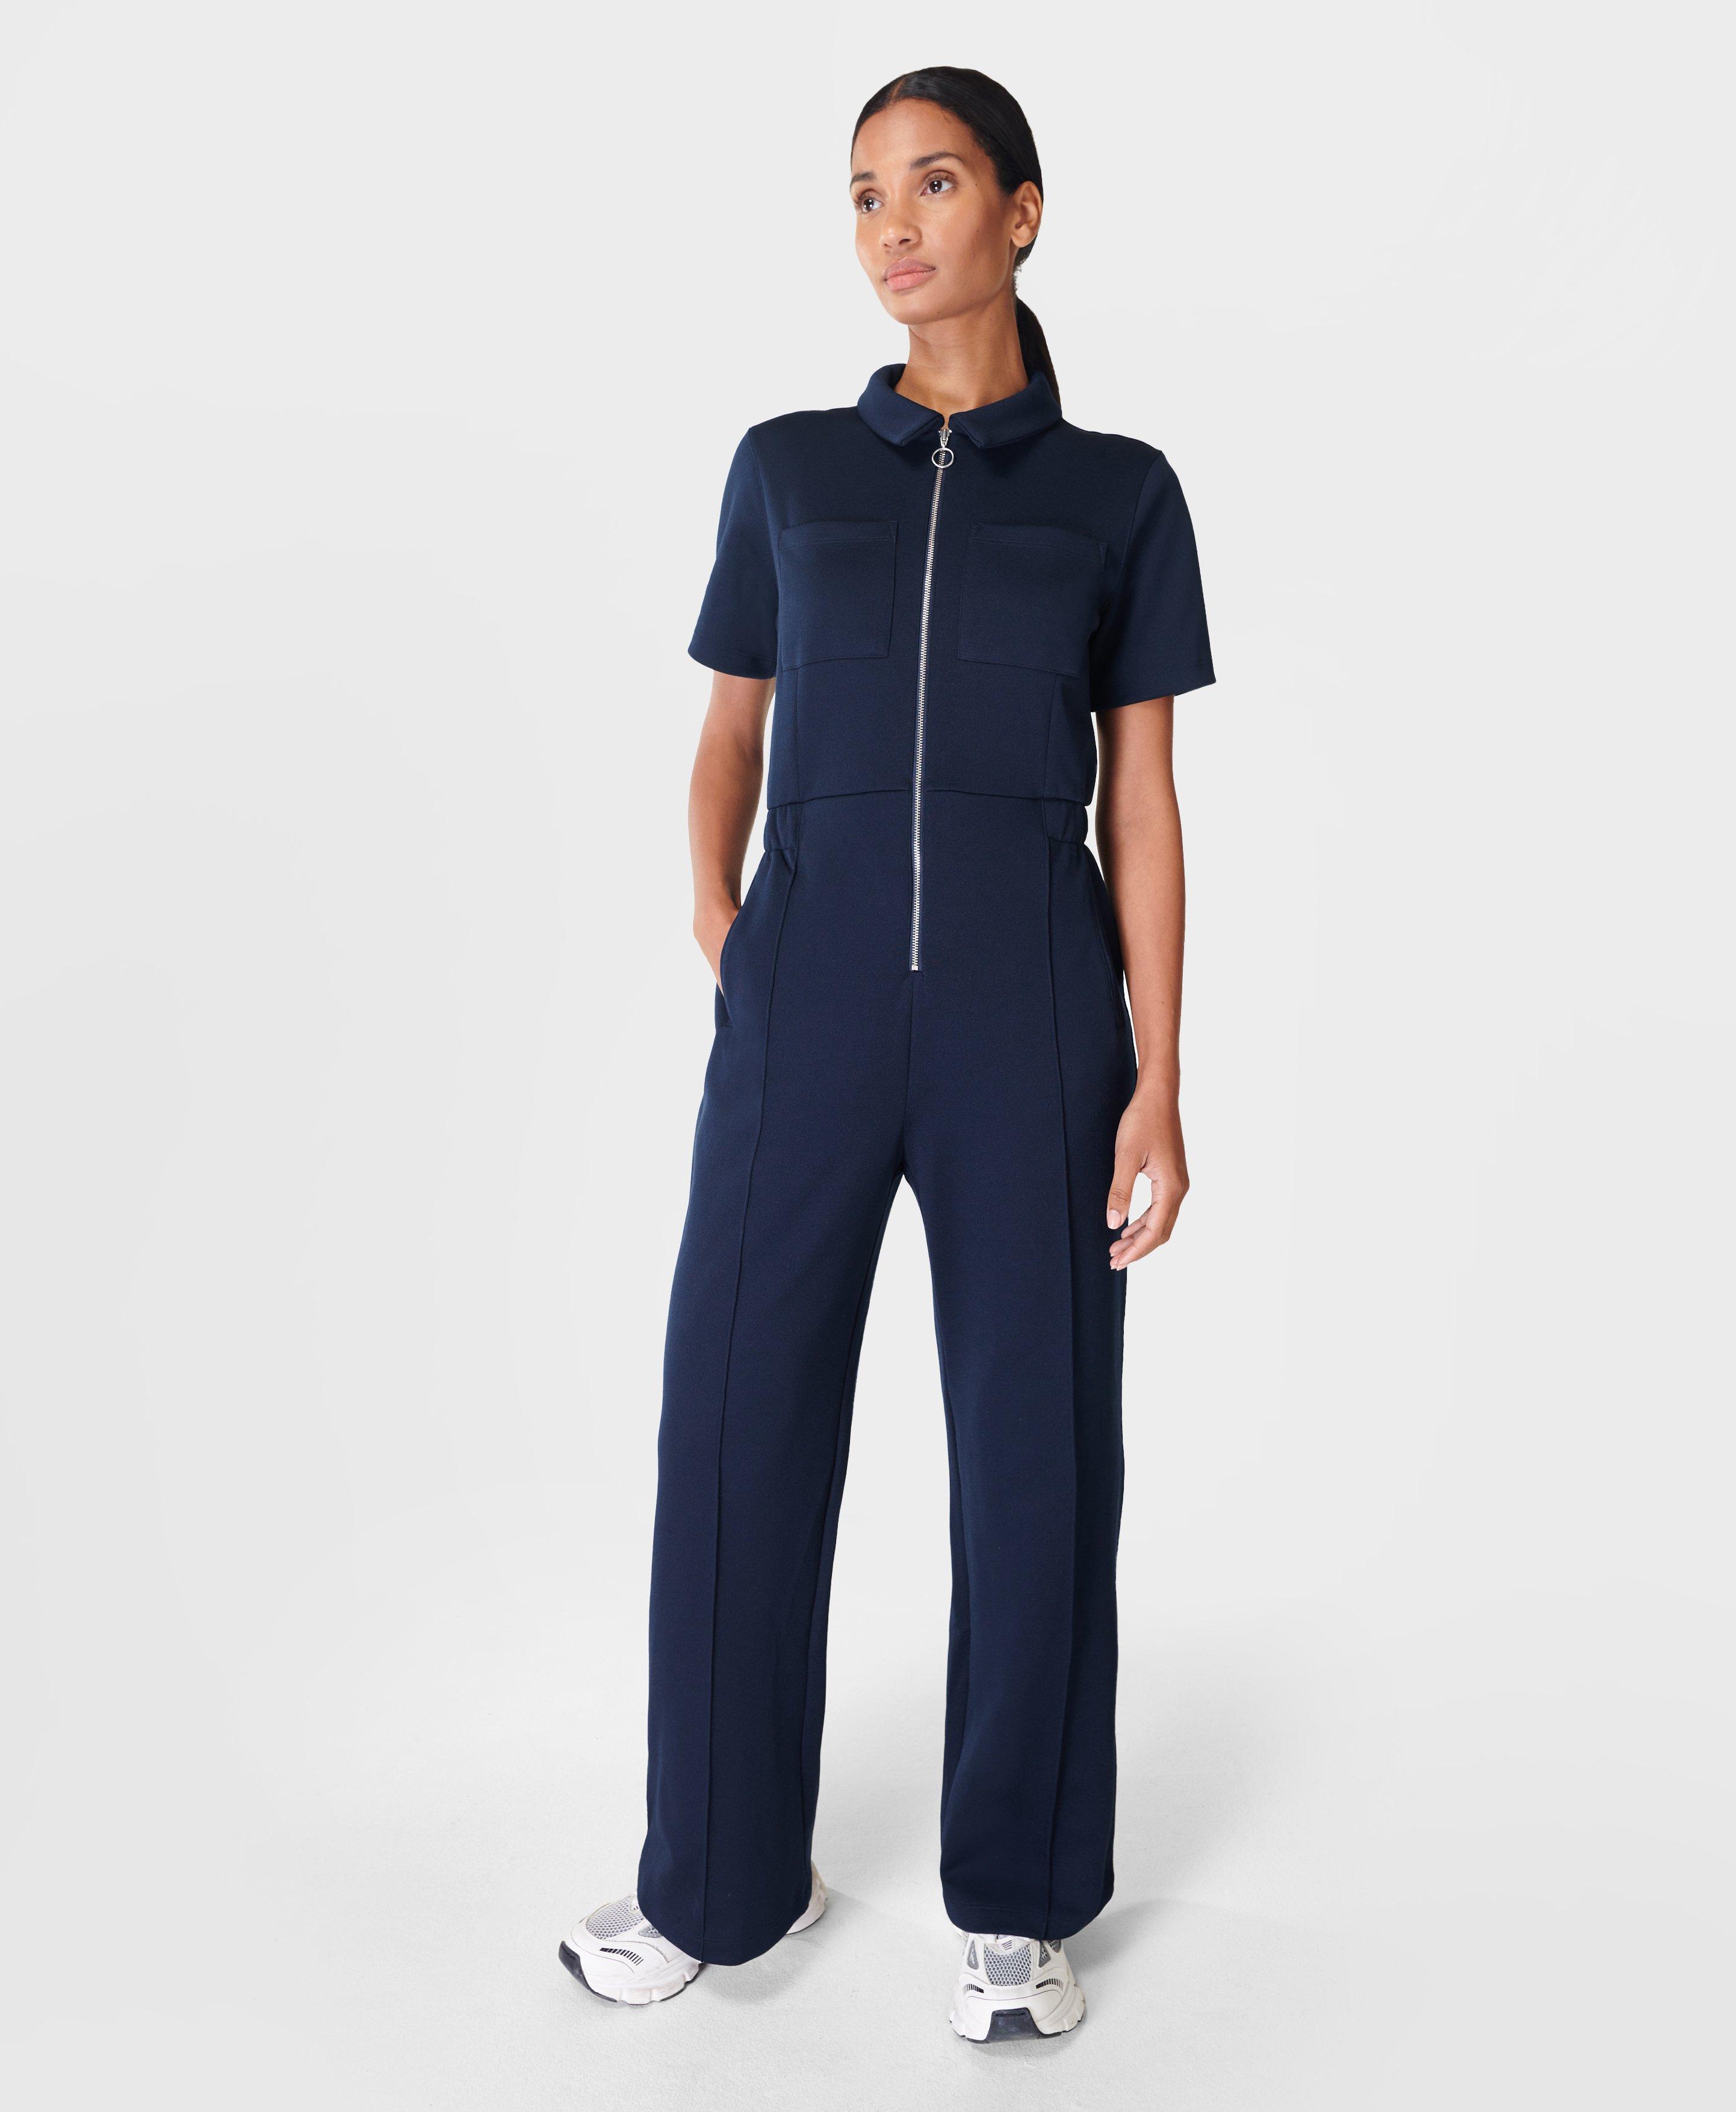 Retro Tricot Jumpsuit- navyblue | Women's Dresses and Jumpsuits | www ...